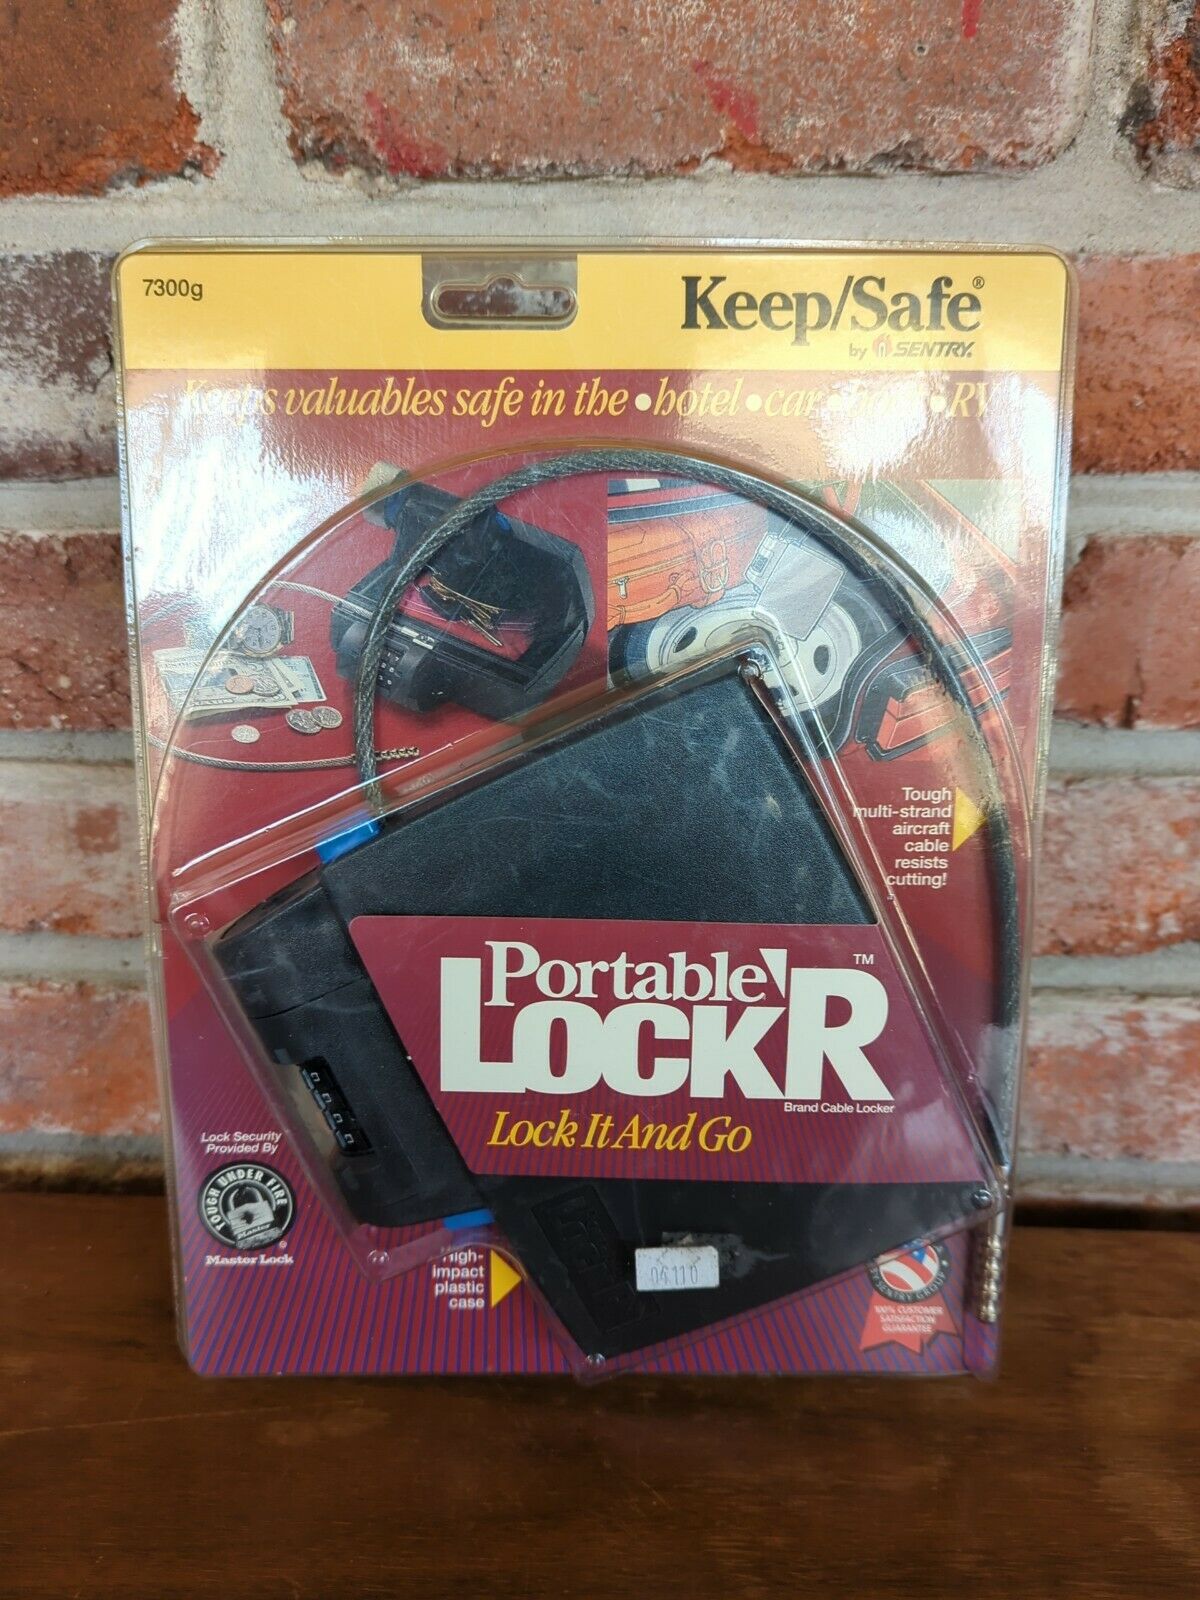 Portable Locker Keep/safe Lock And Go By Sentry Great For Travel  New In Package